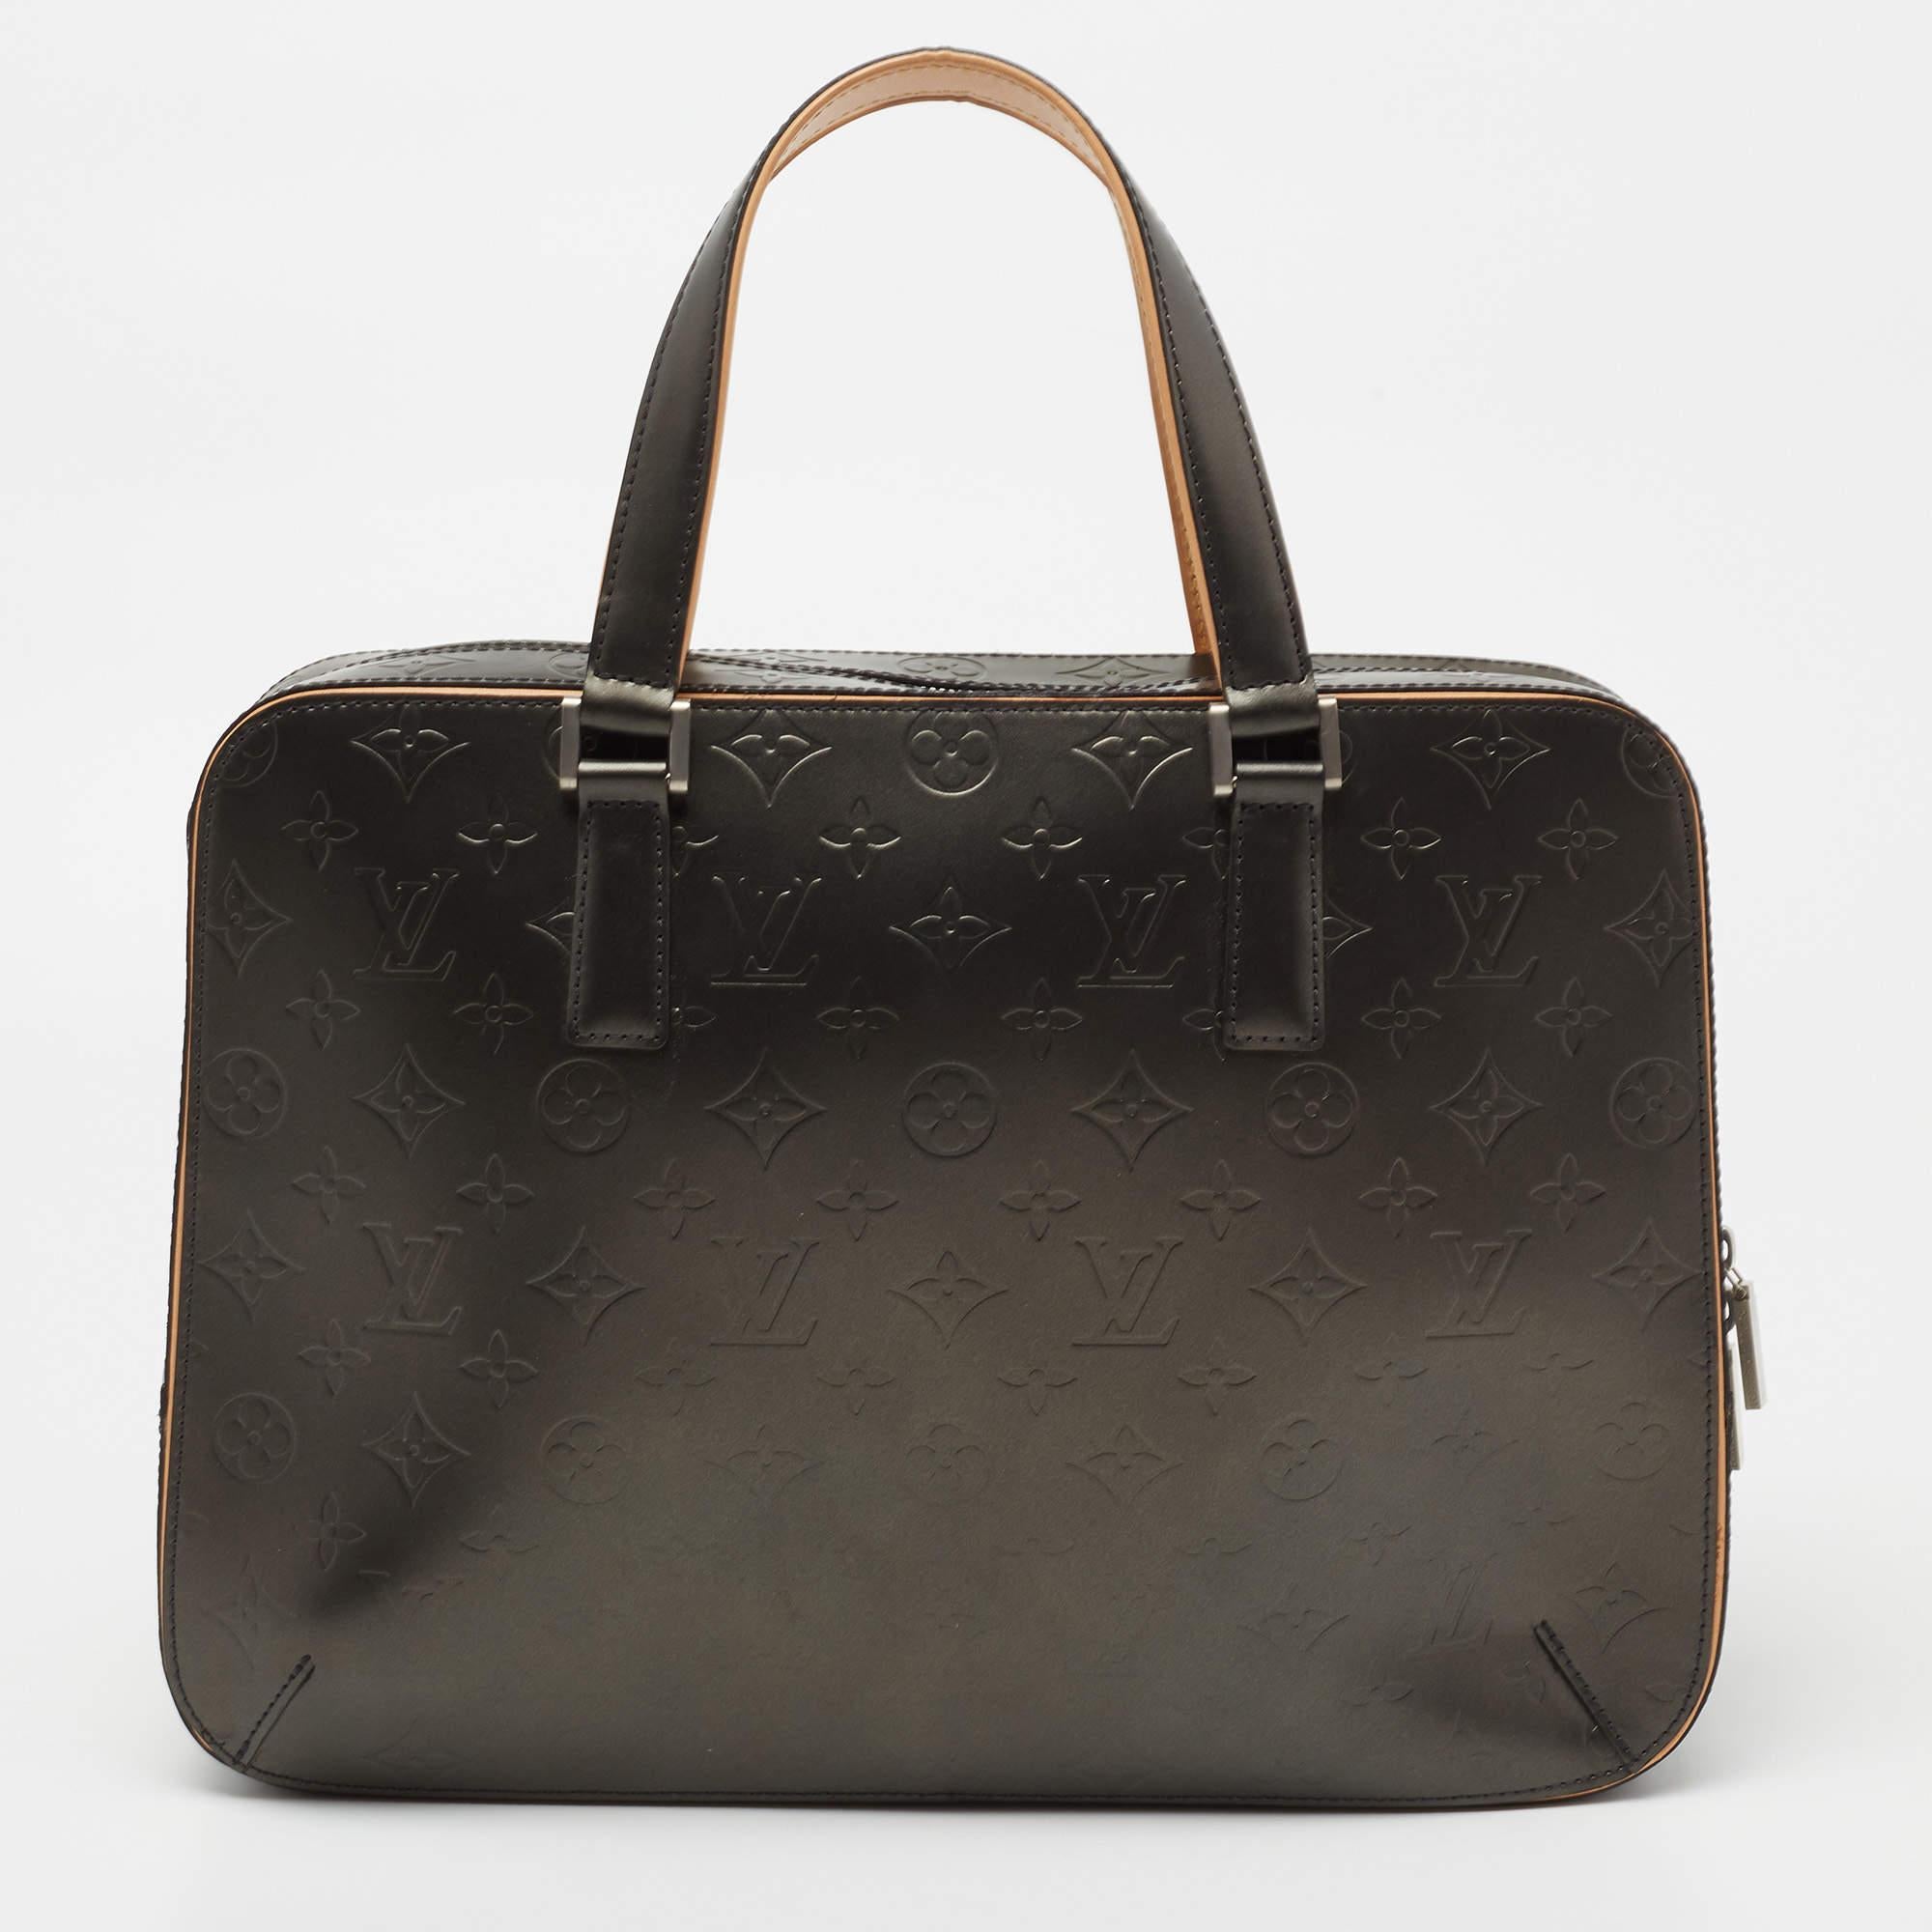 This Mat Malden is an ultra-functional choice to carry your essentials! Crafted using Monogram Empreinte leather into a spacious size, the Louis Vuitton briefcase is perfect for frequent use. The top handles, beautiful exterior, and metal accents